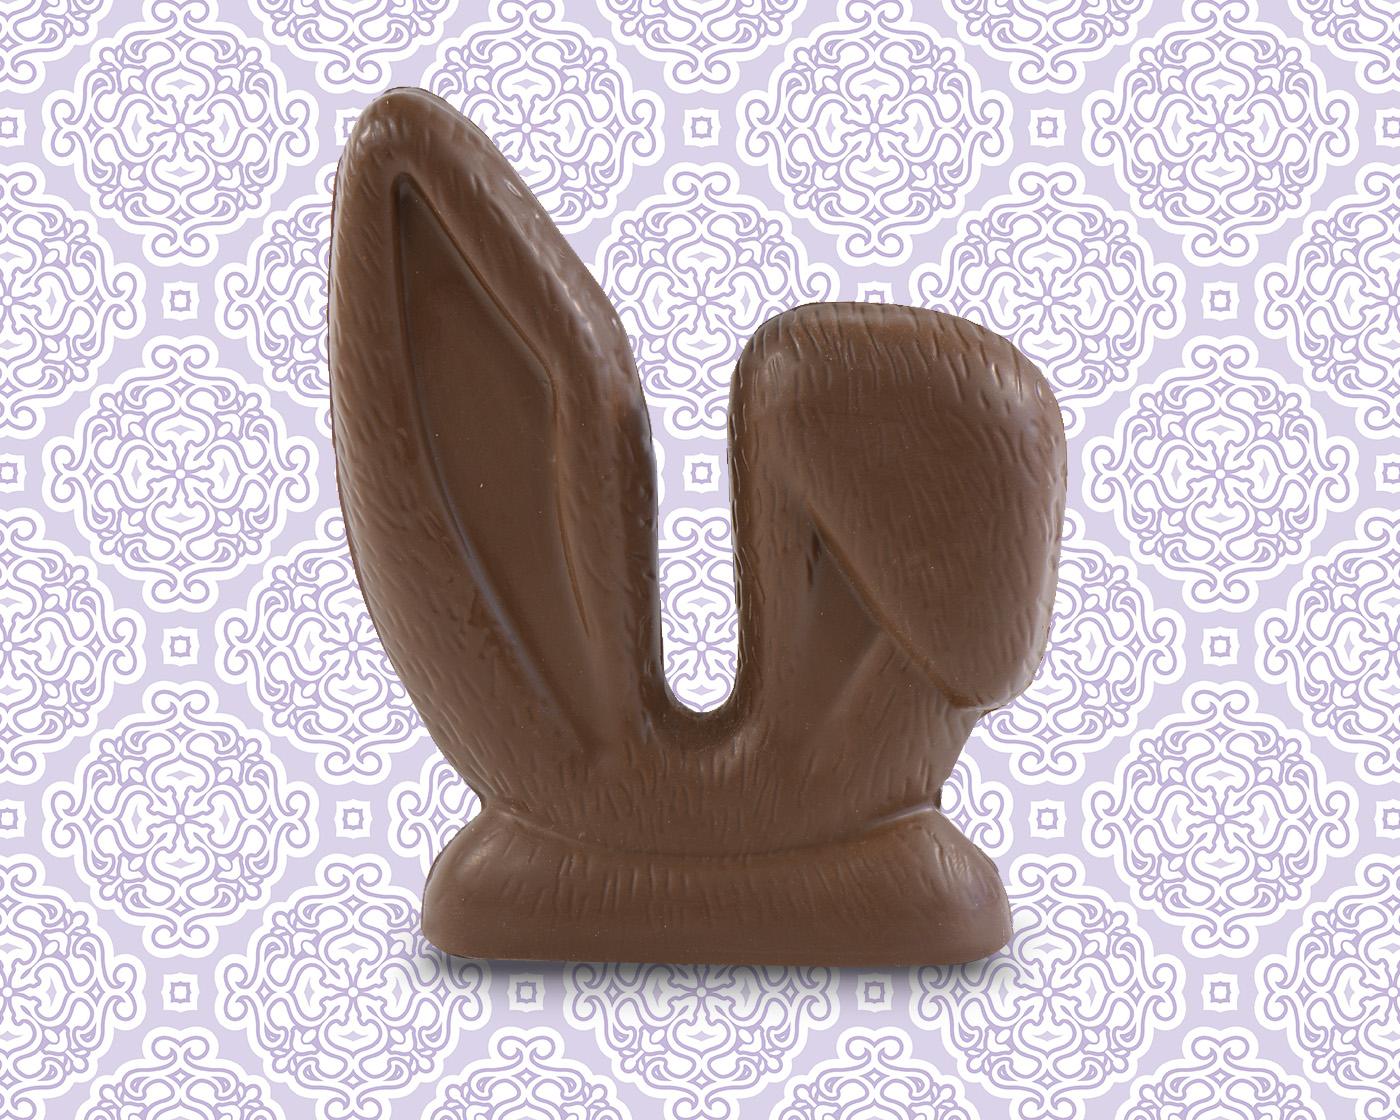 Large Solid Chocolate Easter Bunny Ears